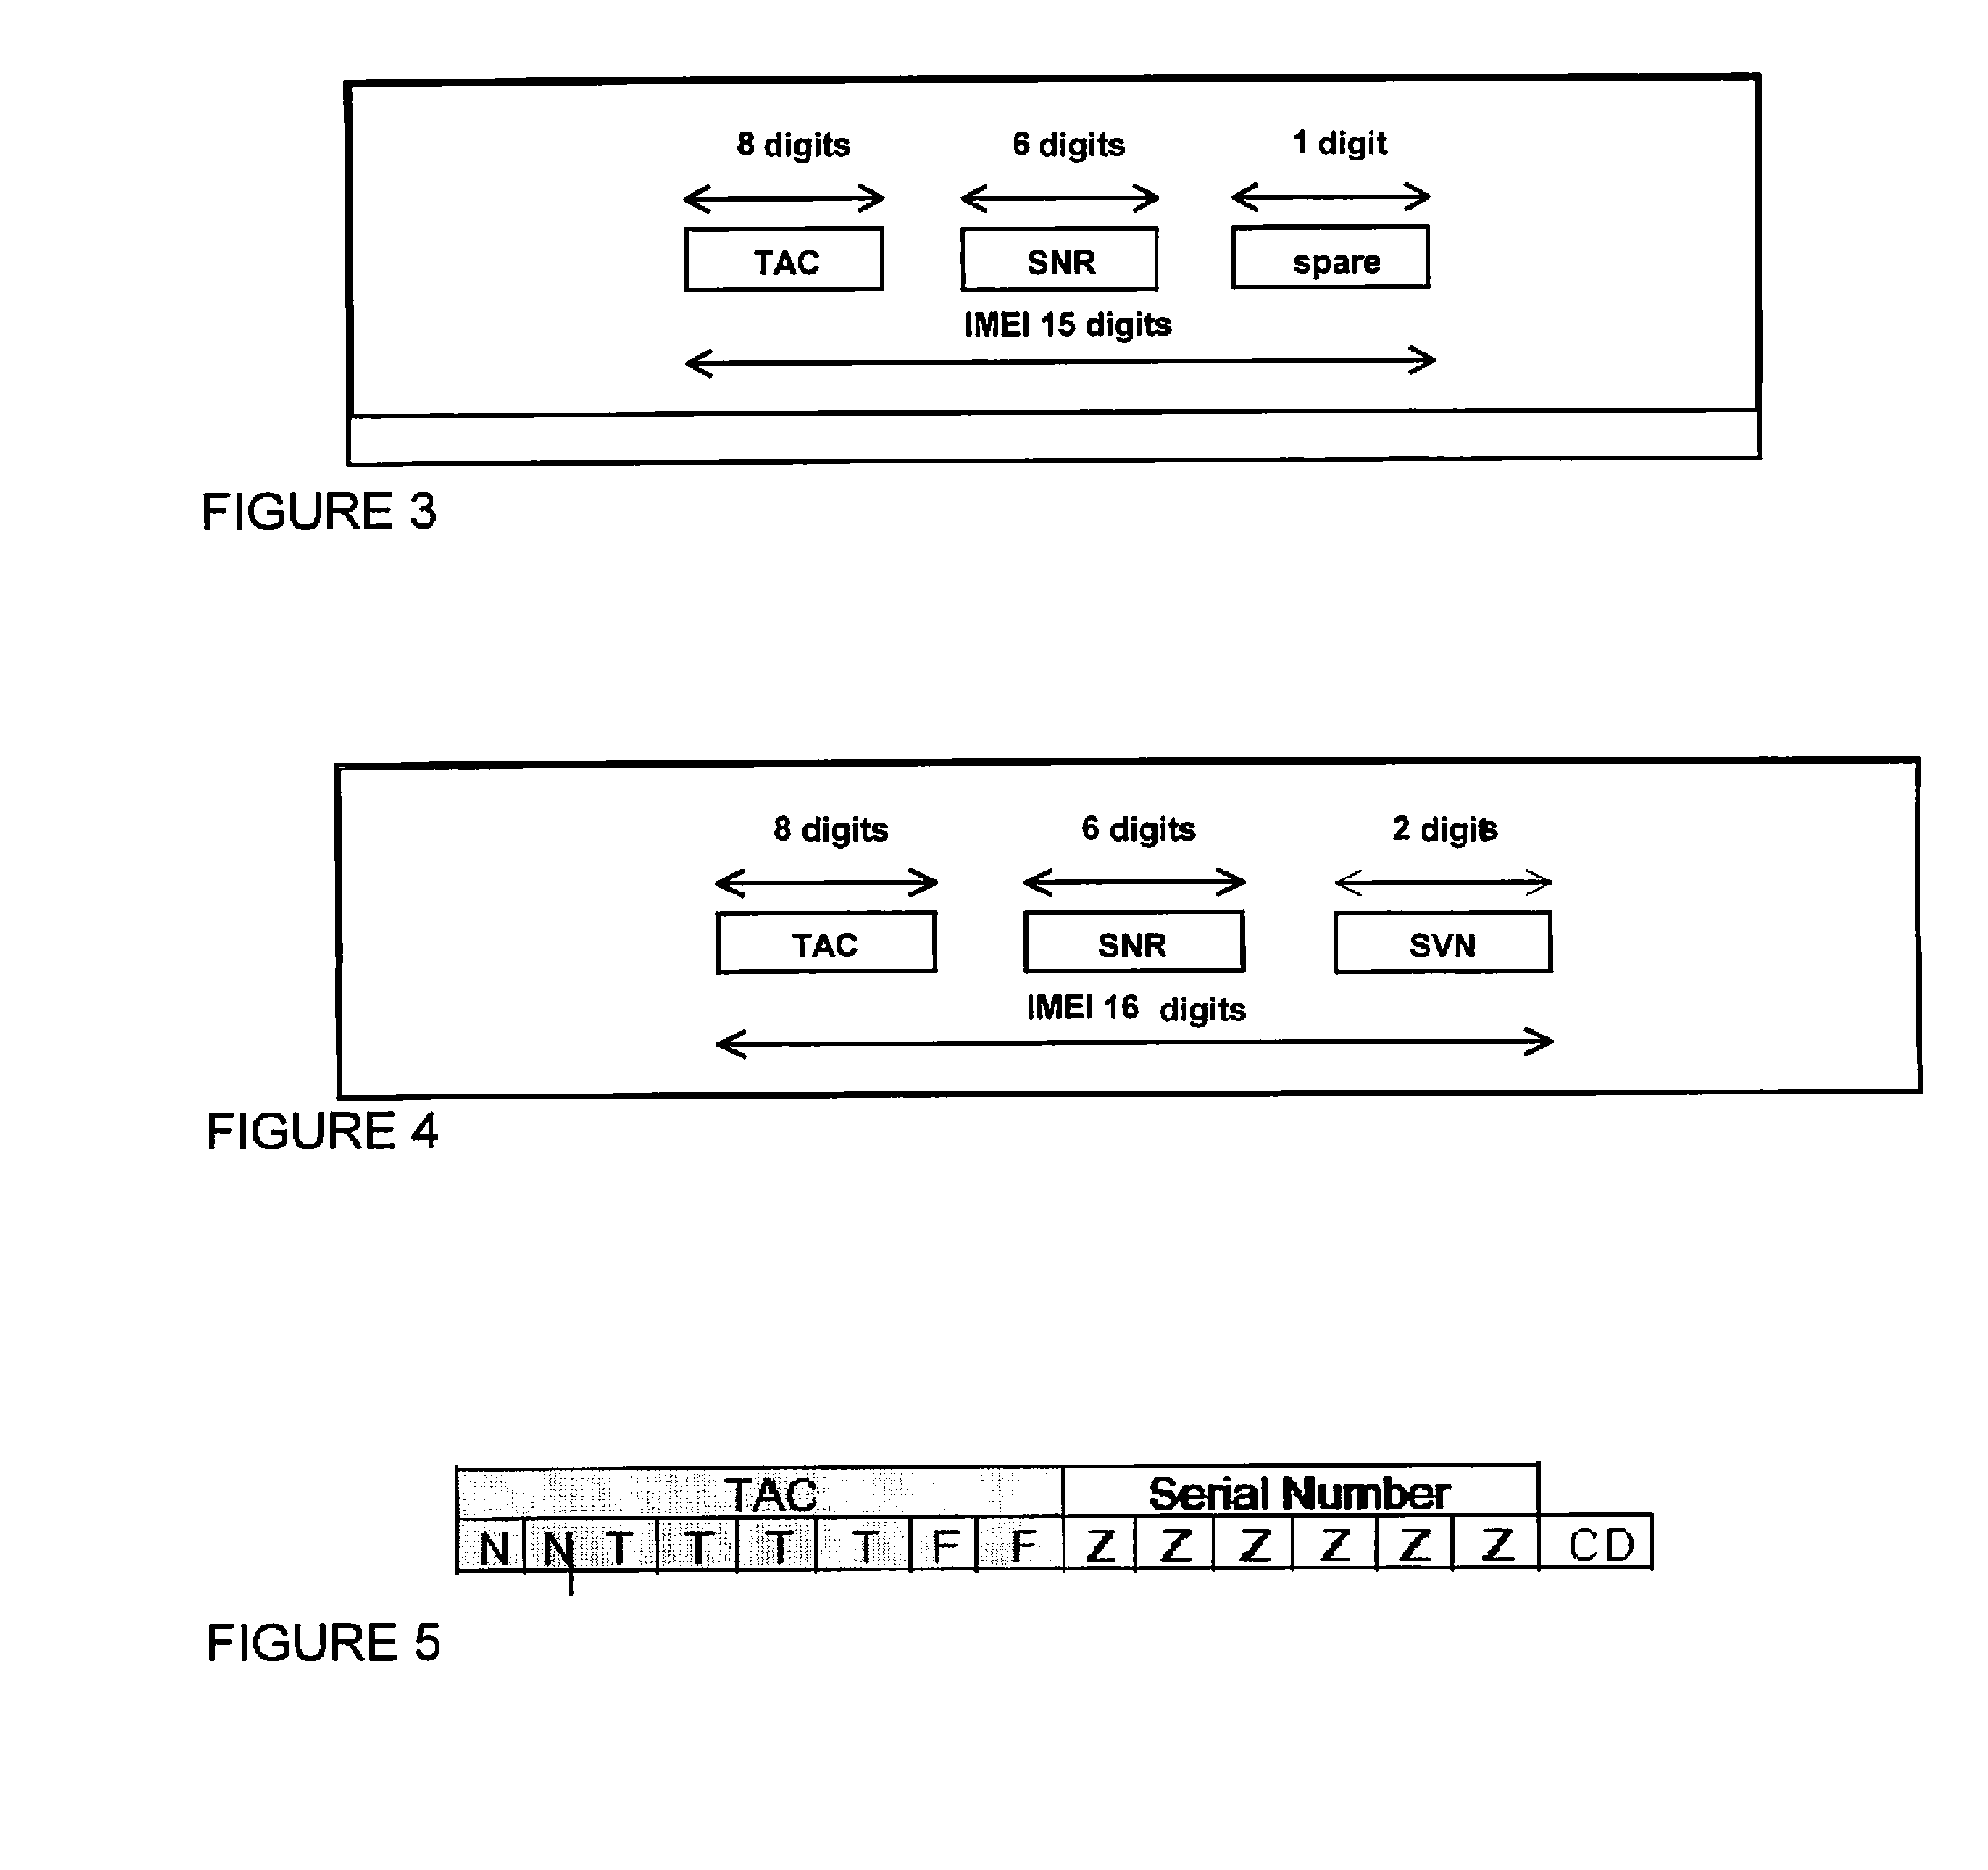 Method and apparatus for instance identifier based on a unique device identifier